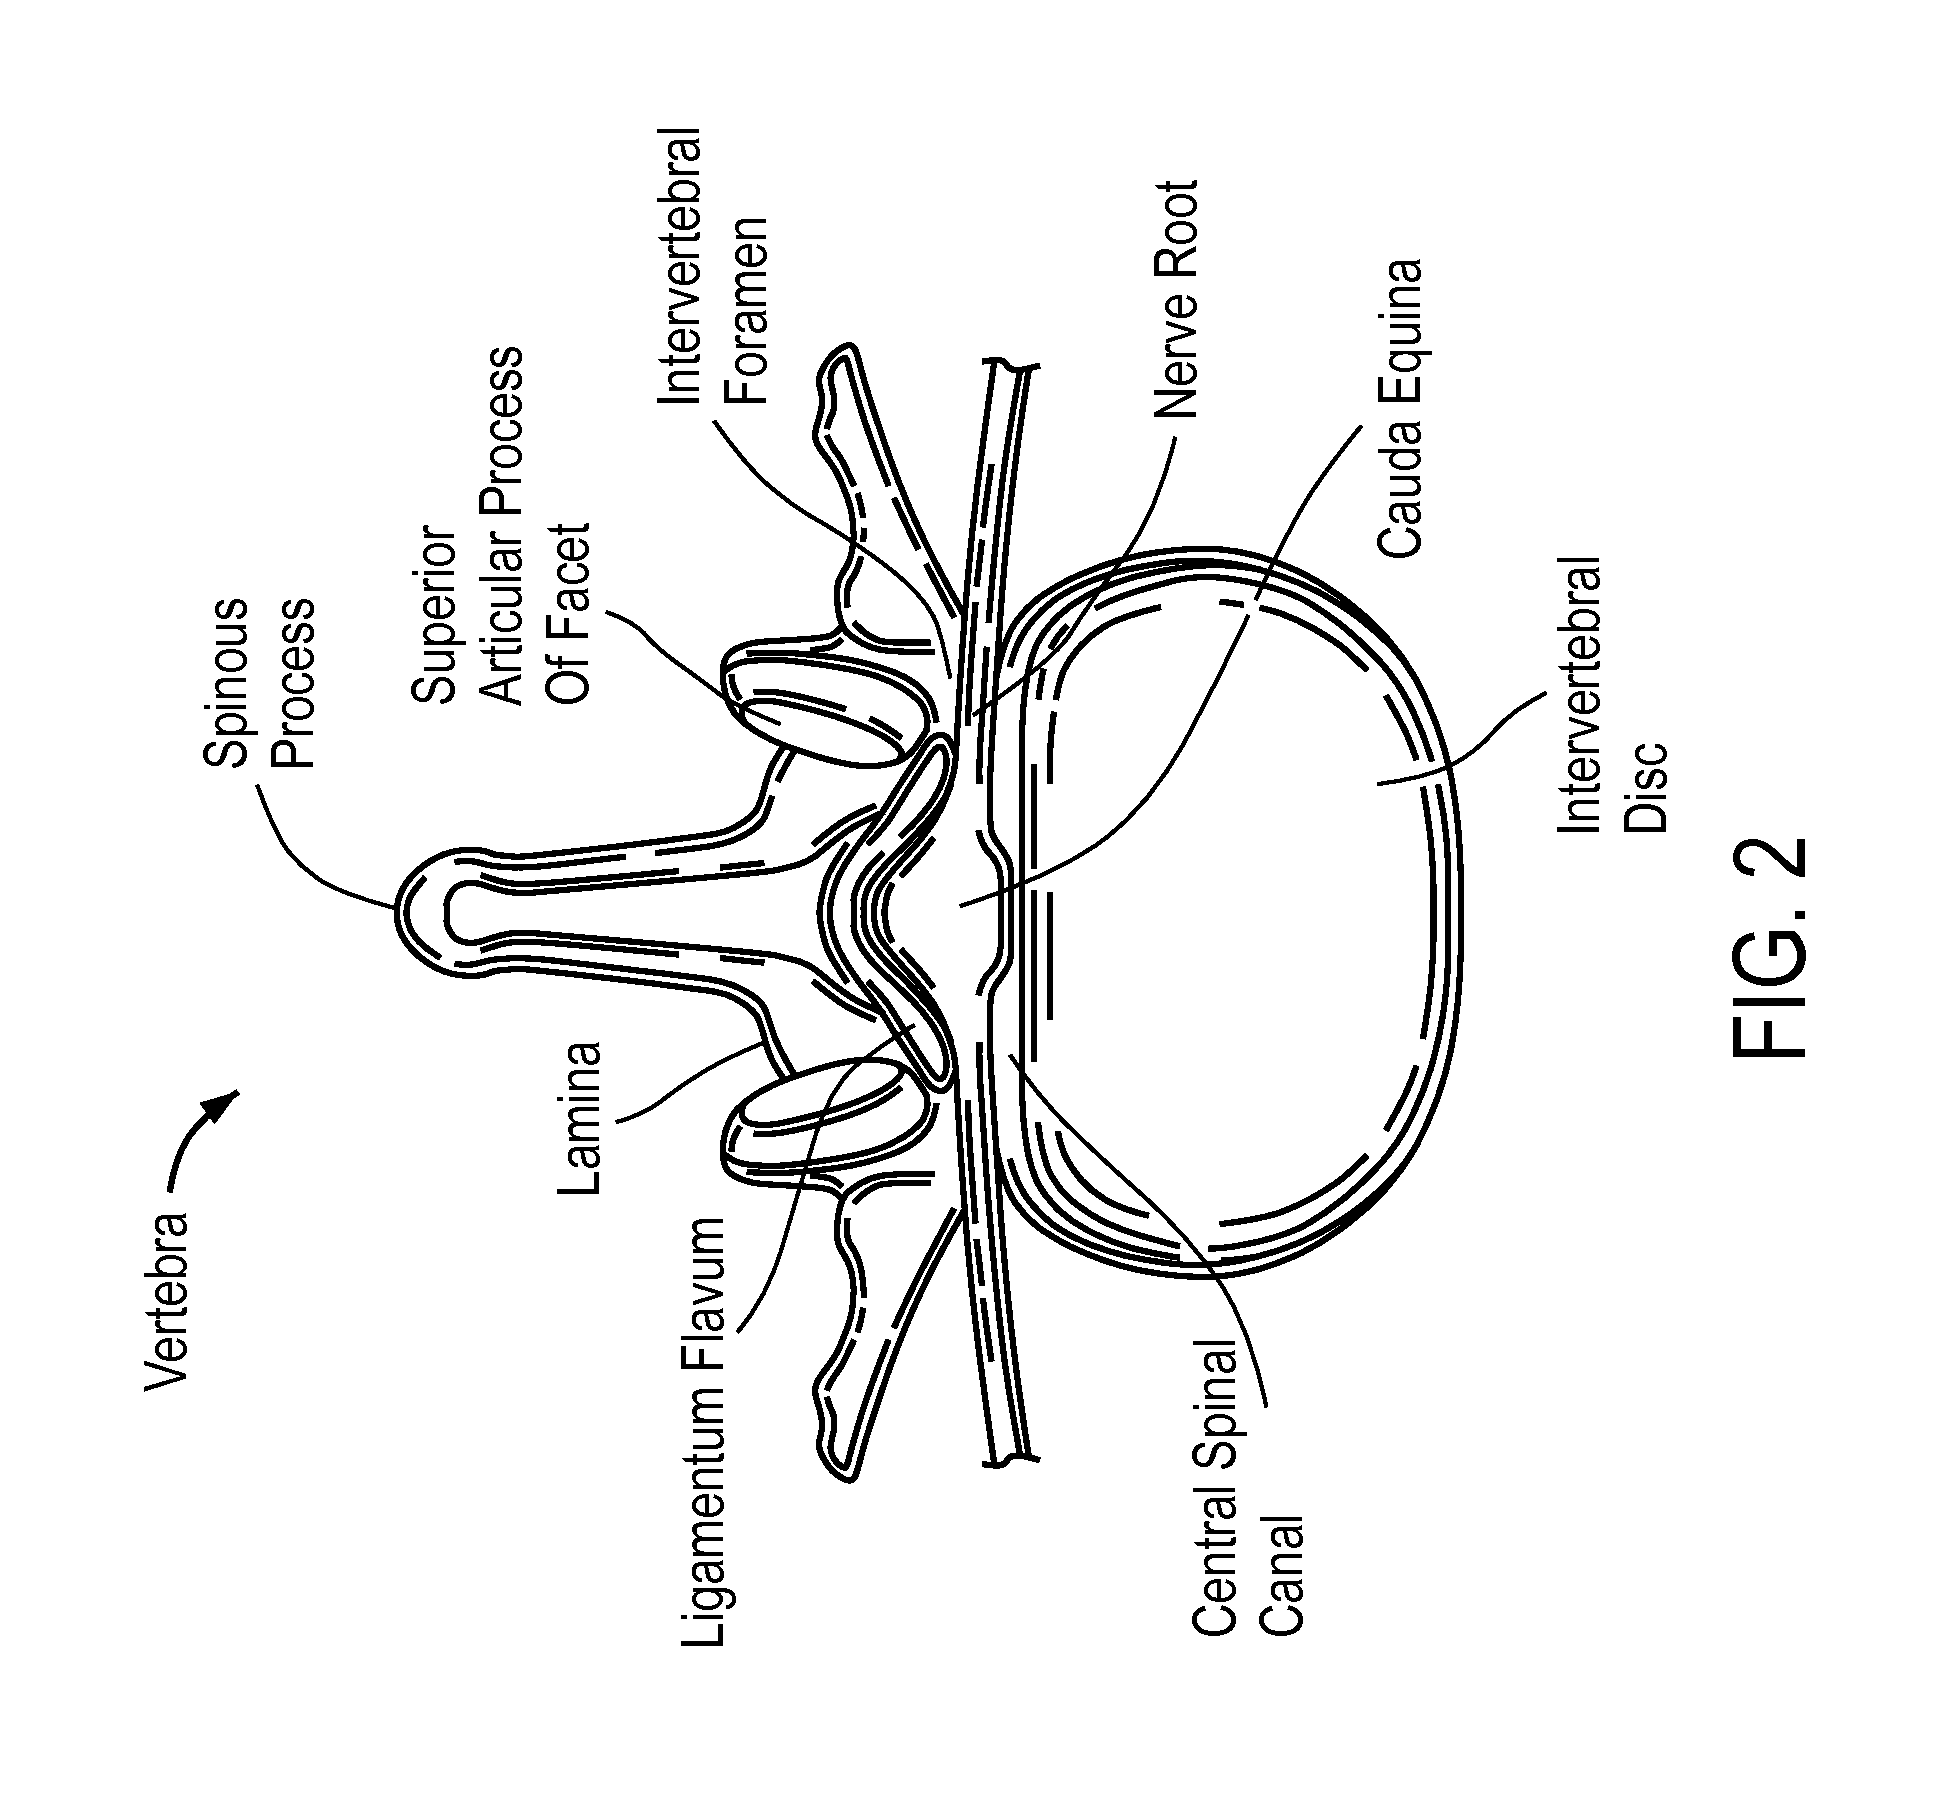 Access and tissue modification systems and methods